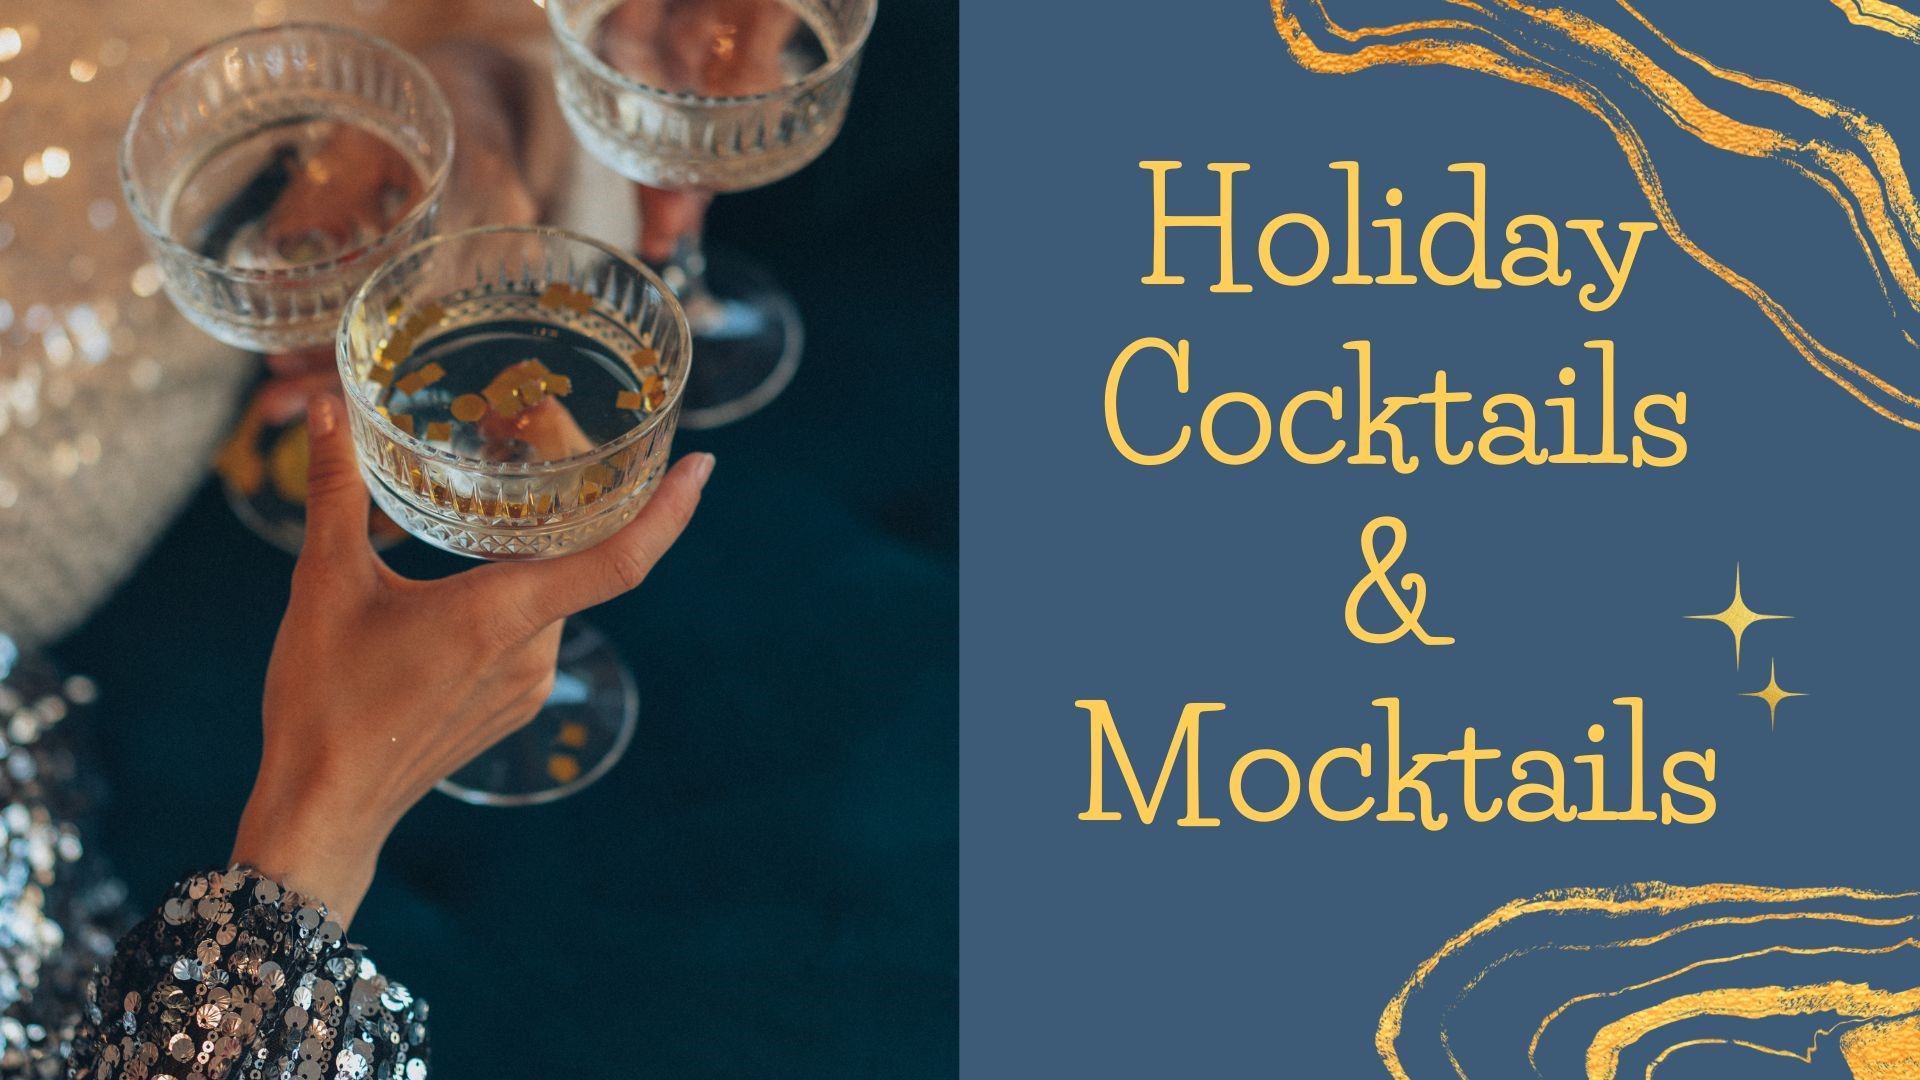 Tis the season for festive holiday drinks. Here’s a look at some ideas for cocktails and mocktails.